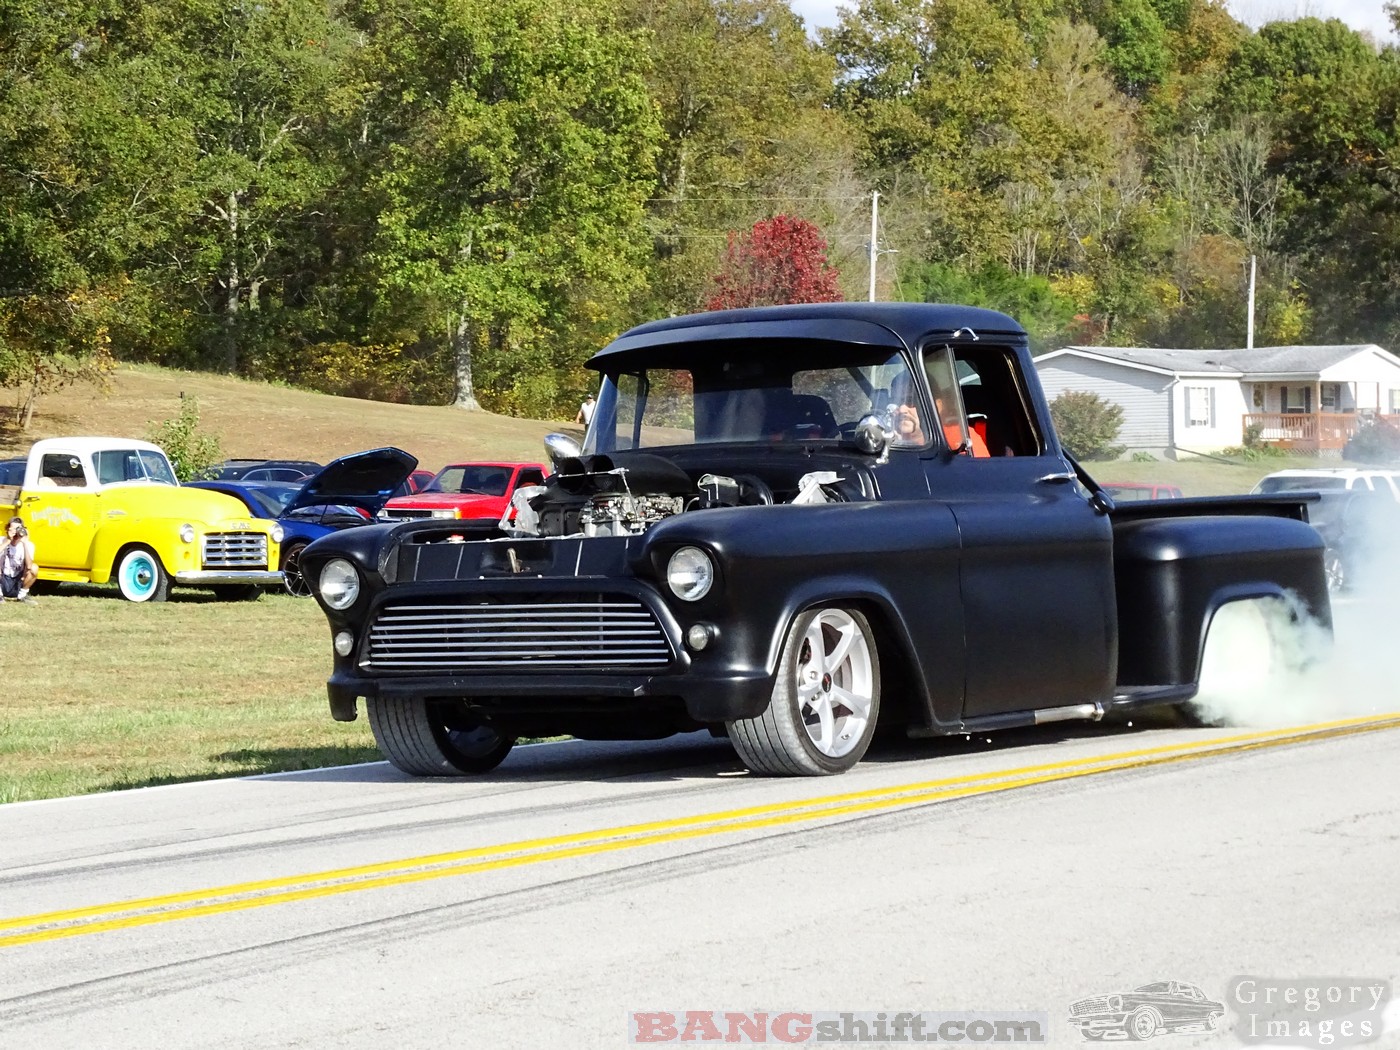 Cruise Coverage: The Simpson Automotive Cruise Brought Out Some Neat Stuff!